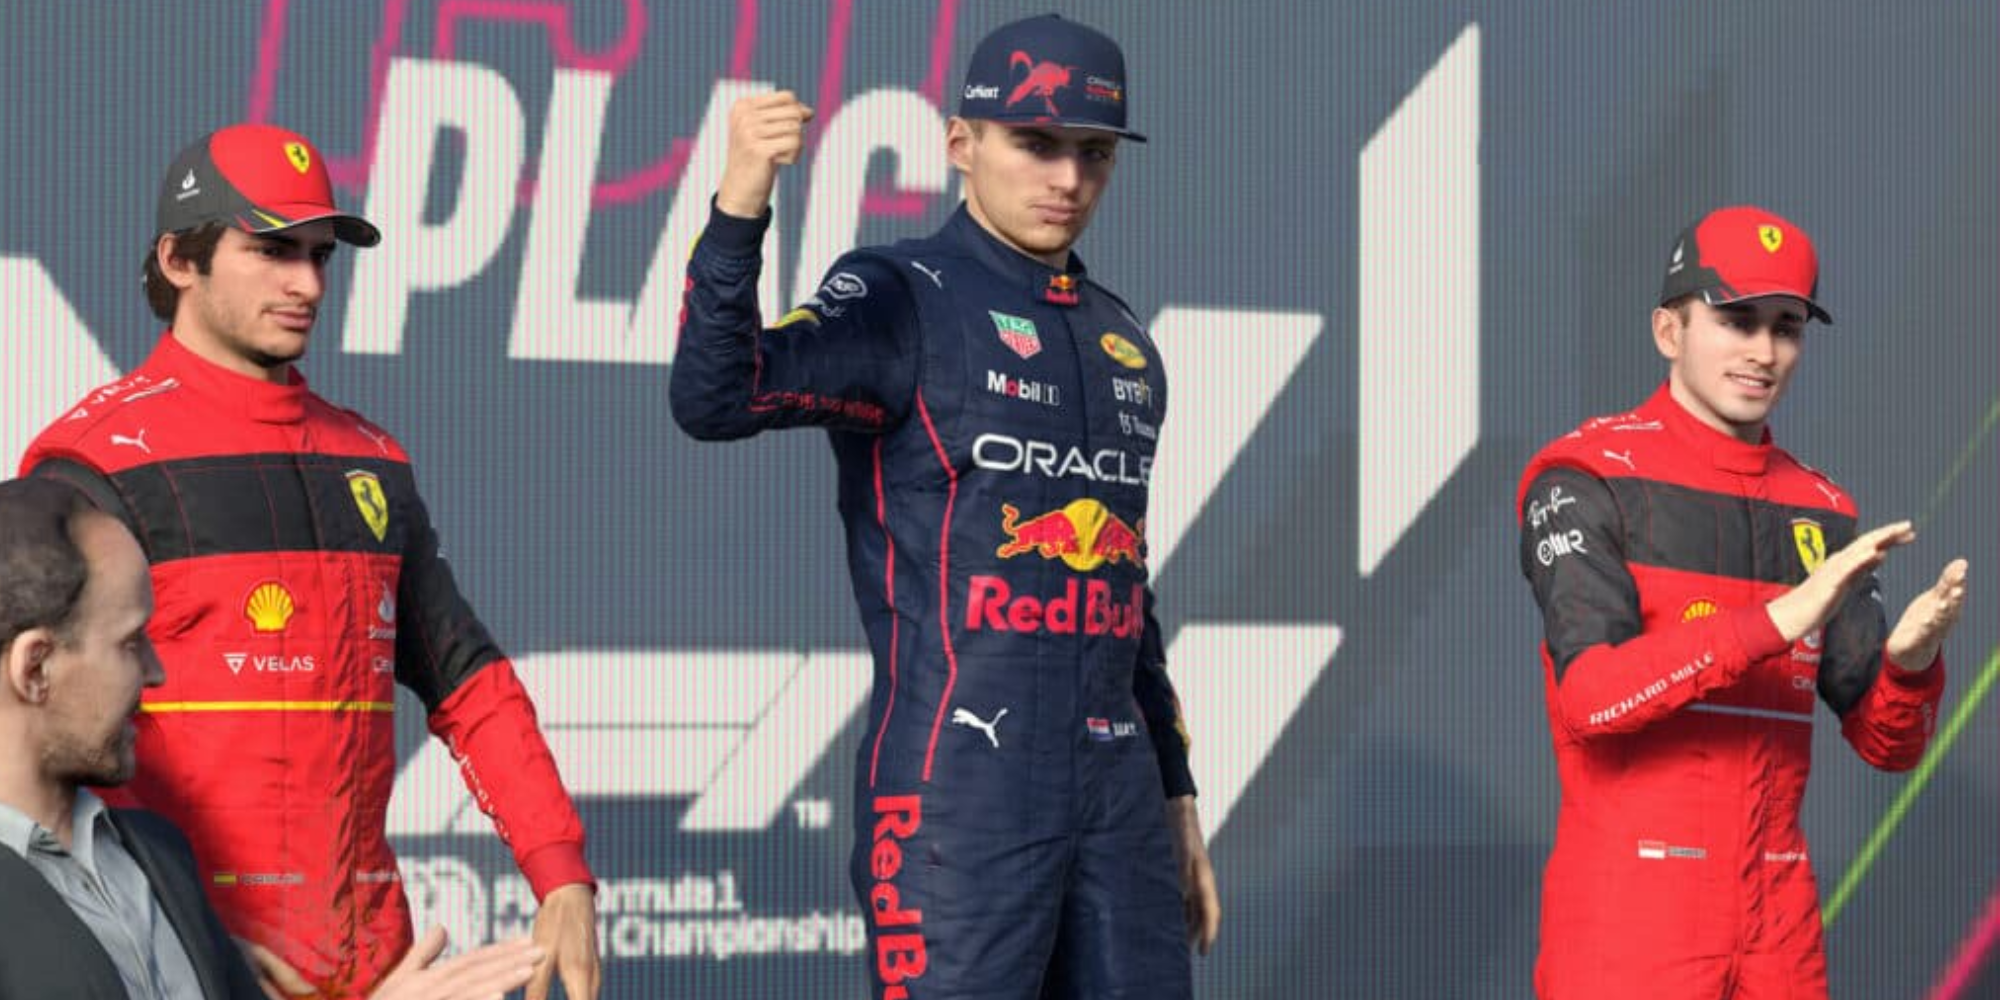 Sainz, Verstappen and Leclerc on the Podium in F1 22